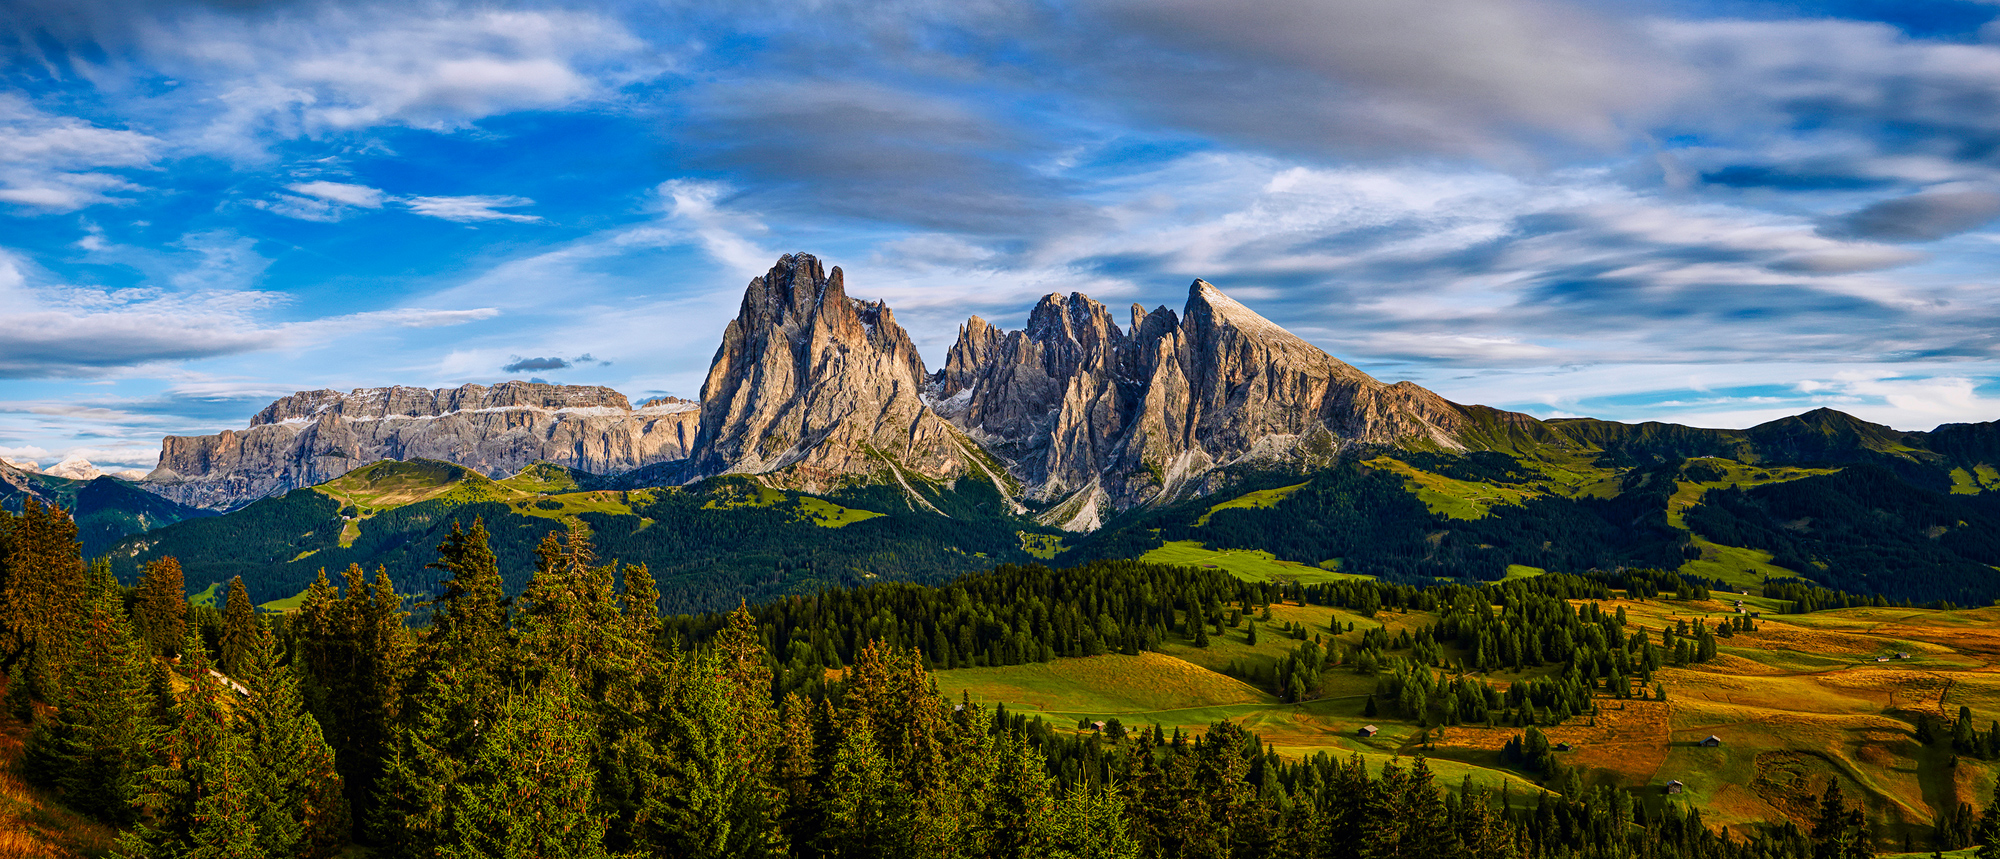 One of my favorite locations in the day, Dolomites, 4 exposure stitch